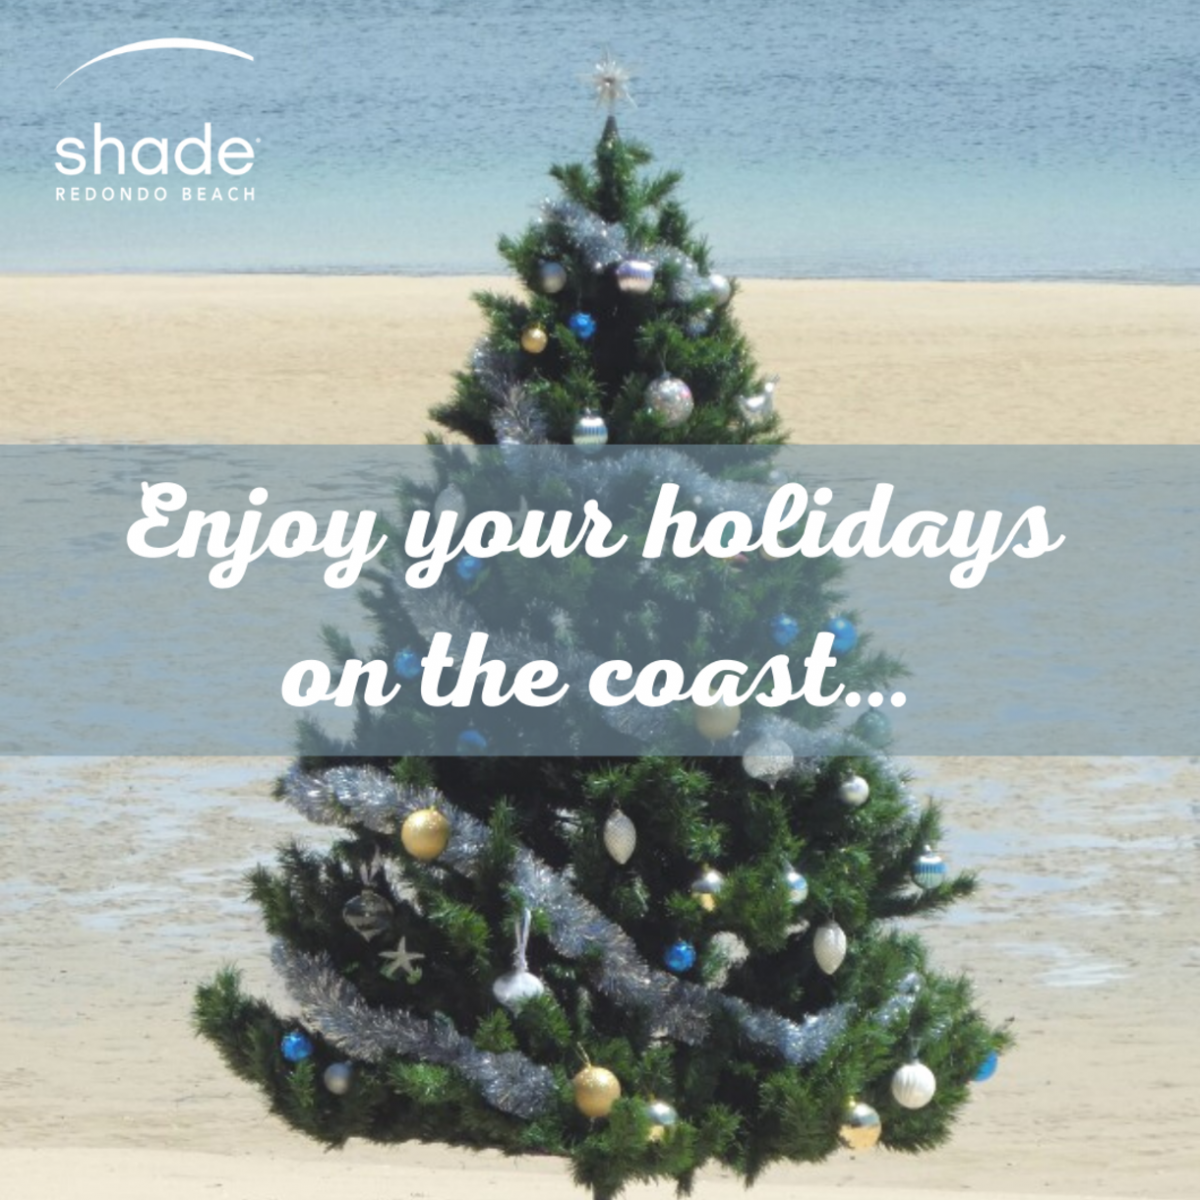 Holiday Room Sale Do you have family or friends visiting this holiday? Make it an oceanside staycation with room rates starting at only $222 now through January 6th, 2022. Reservation is Pre-Paid, Non-Cancellable & Non-Refundable. Date change valid within promotion period. Restrictions may apply.